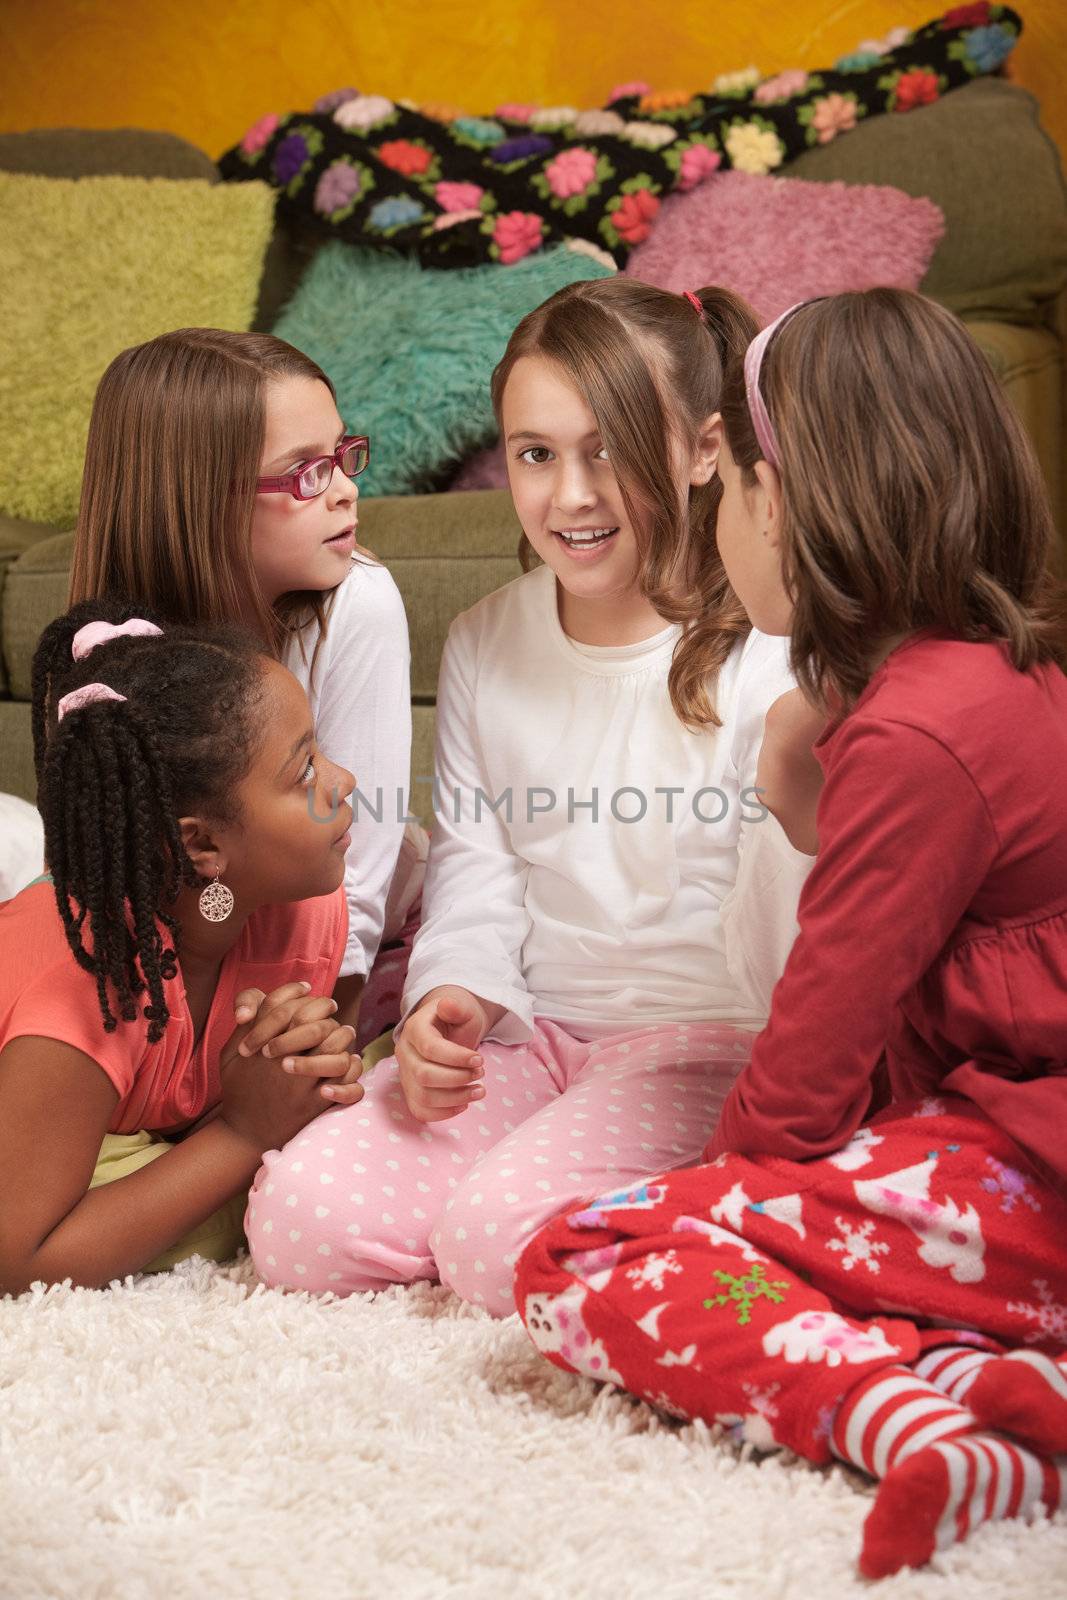 Four chatty little girls in pajamas at a sleepover